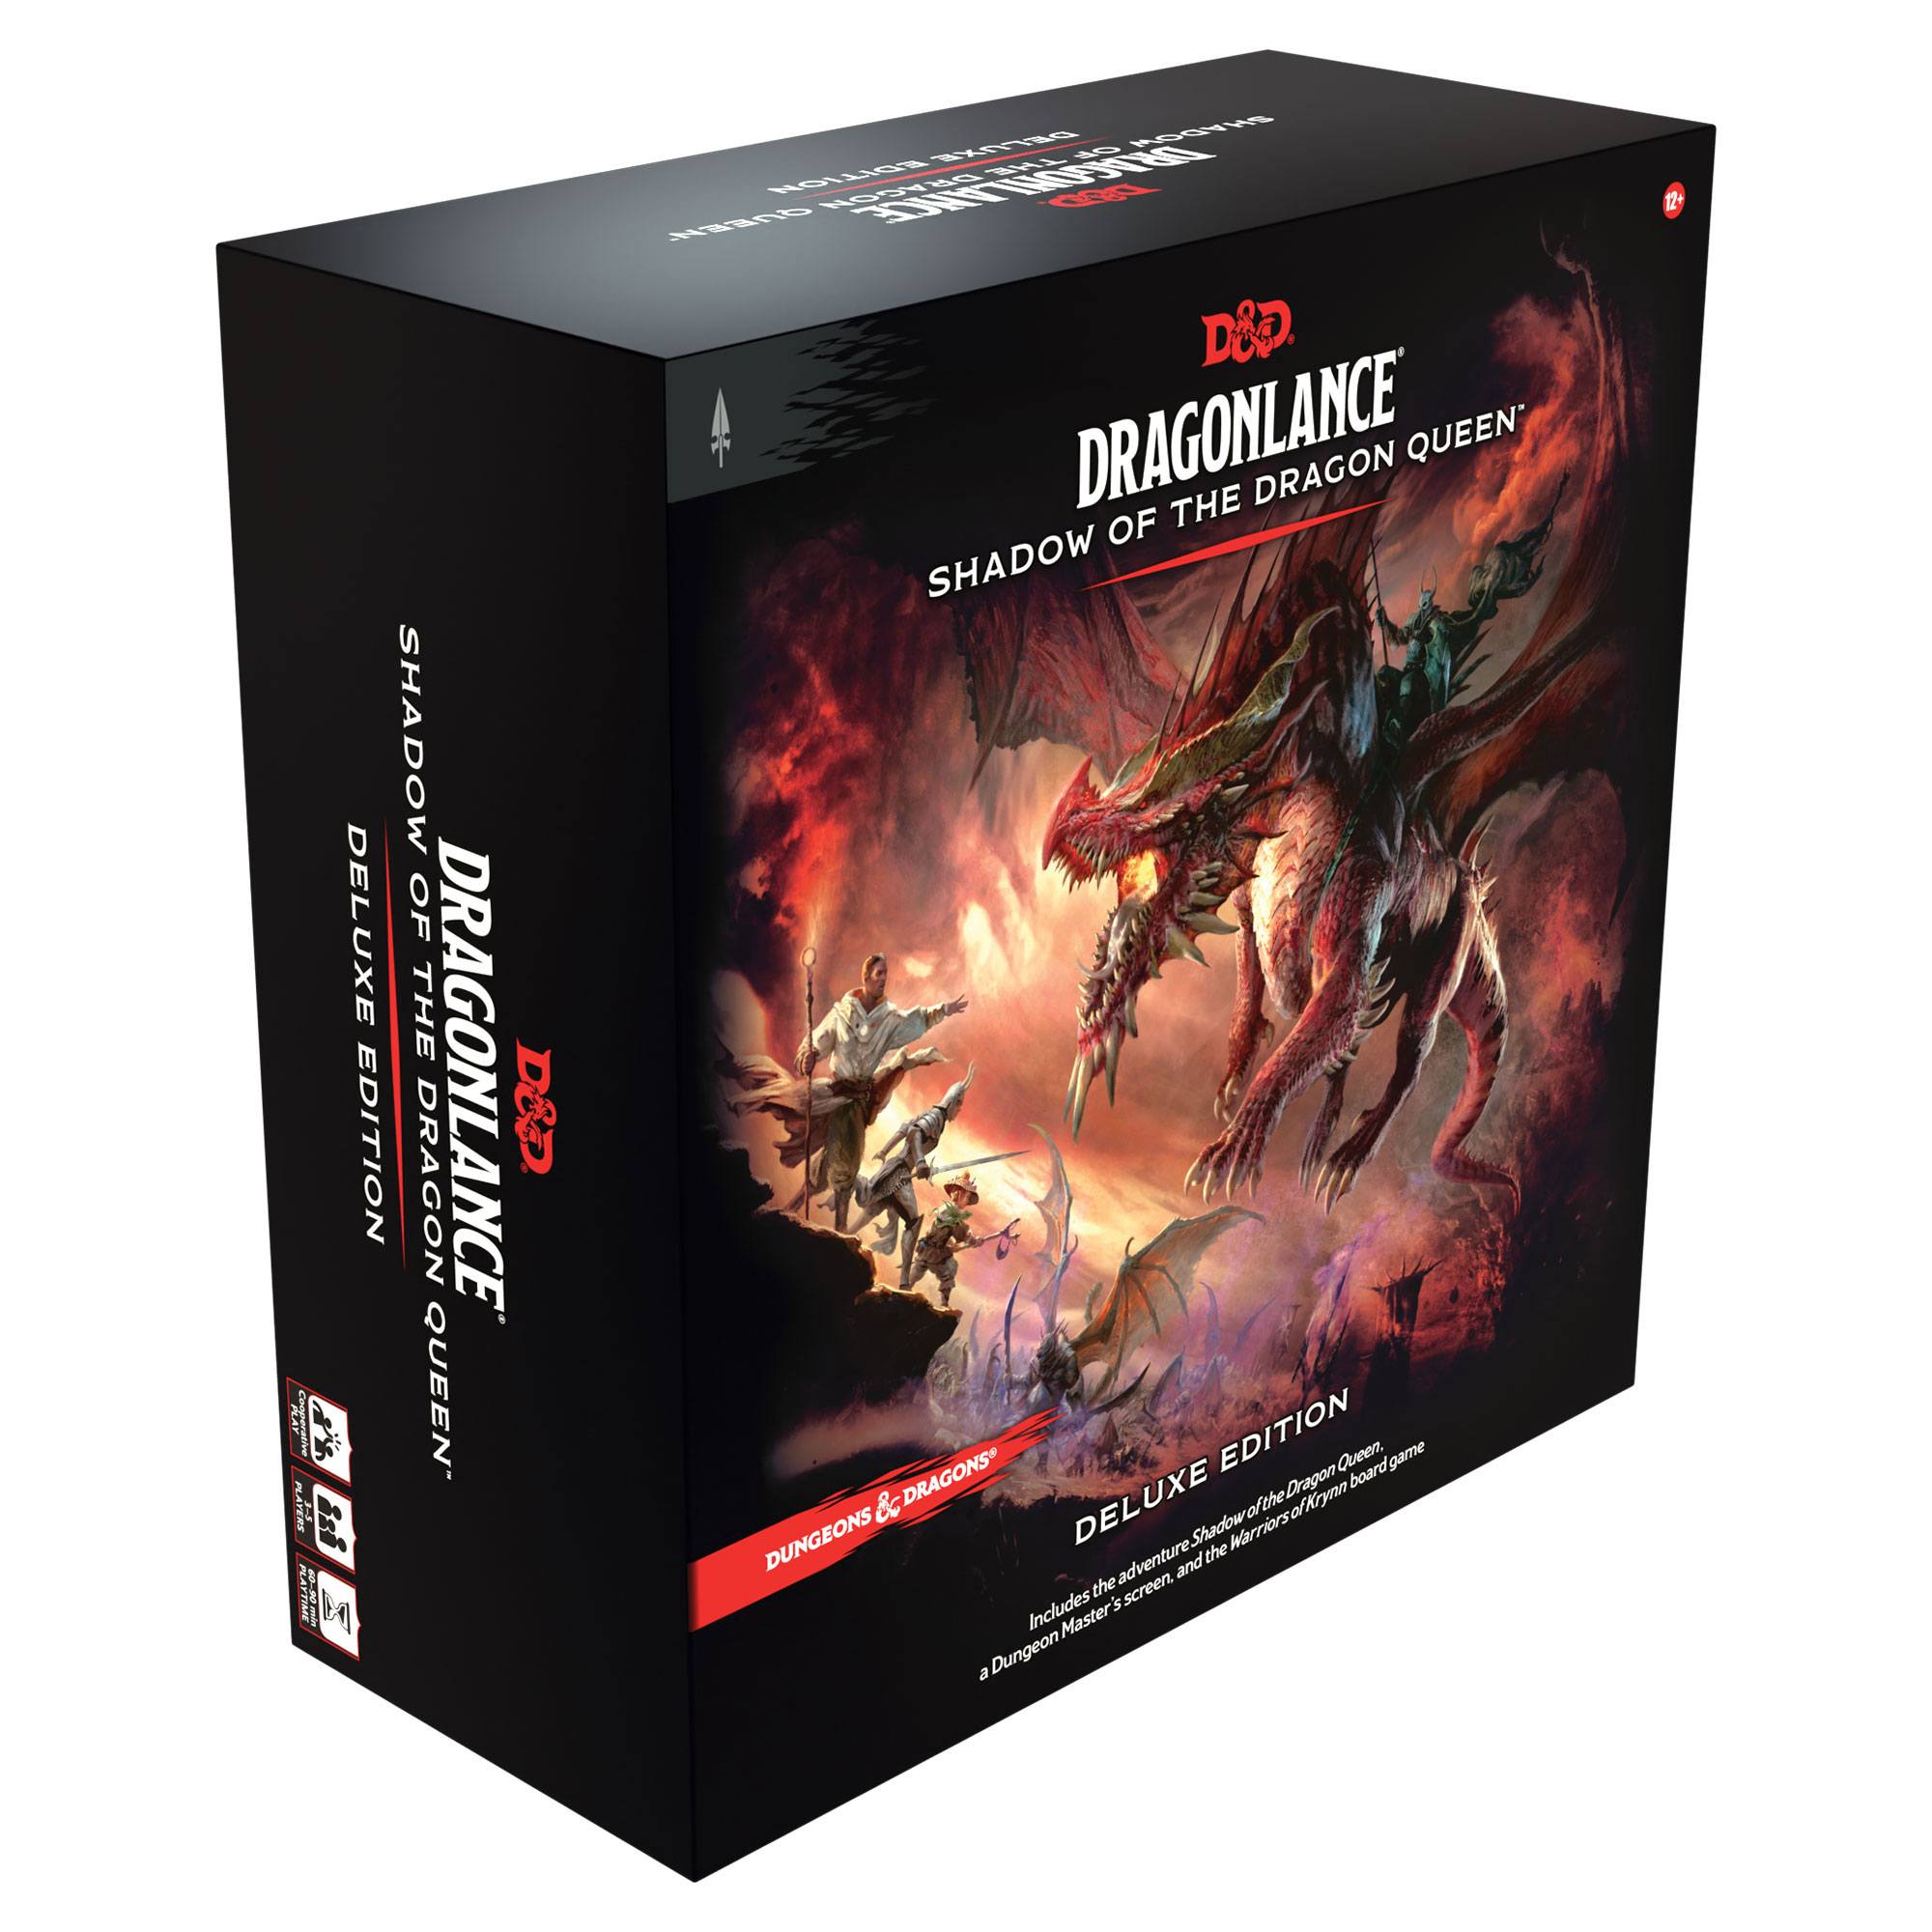 Dungeons & Dragons RPG Dragonlance: Shadow of the Dragon Queen Deluxe Edition english - Severely damaged packaging